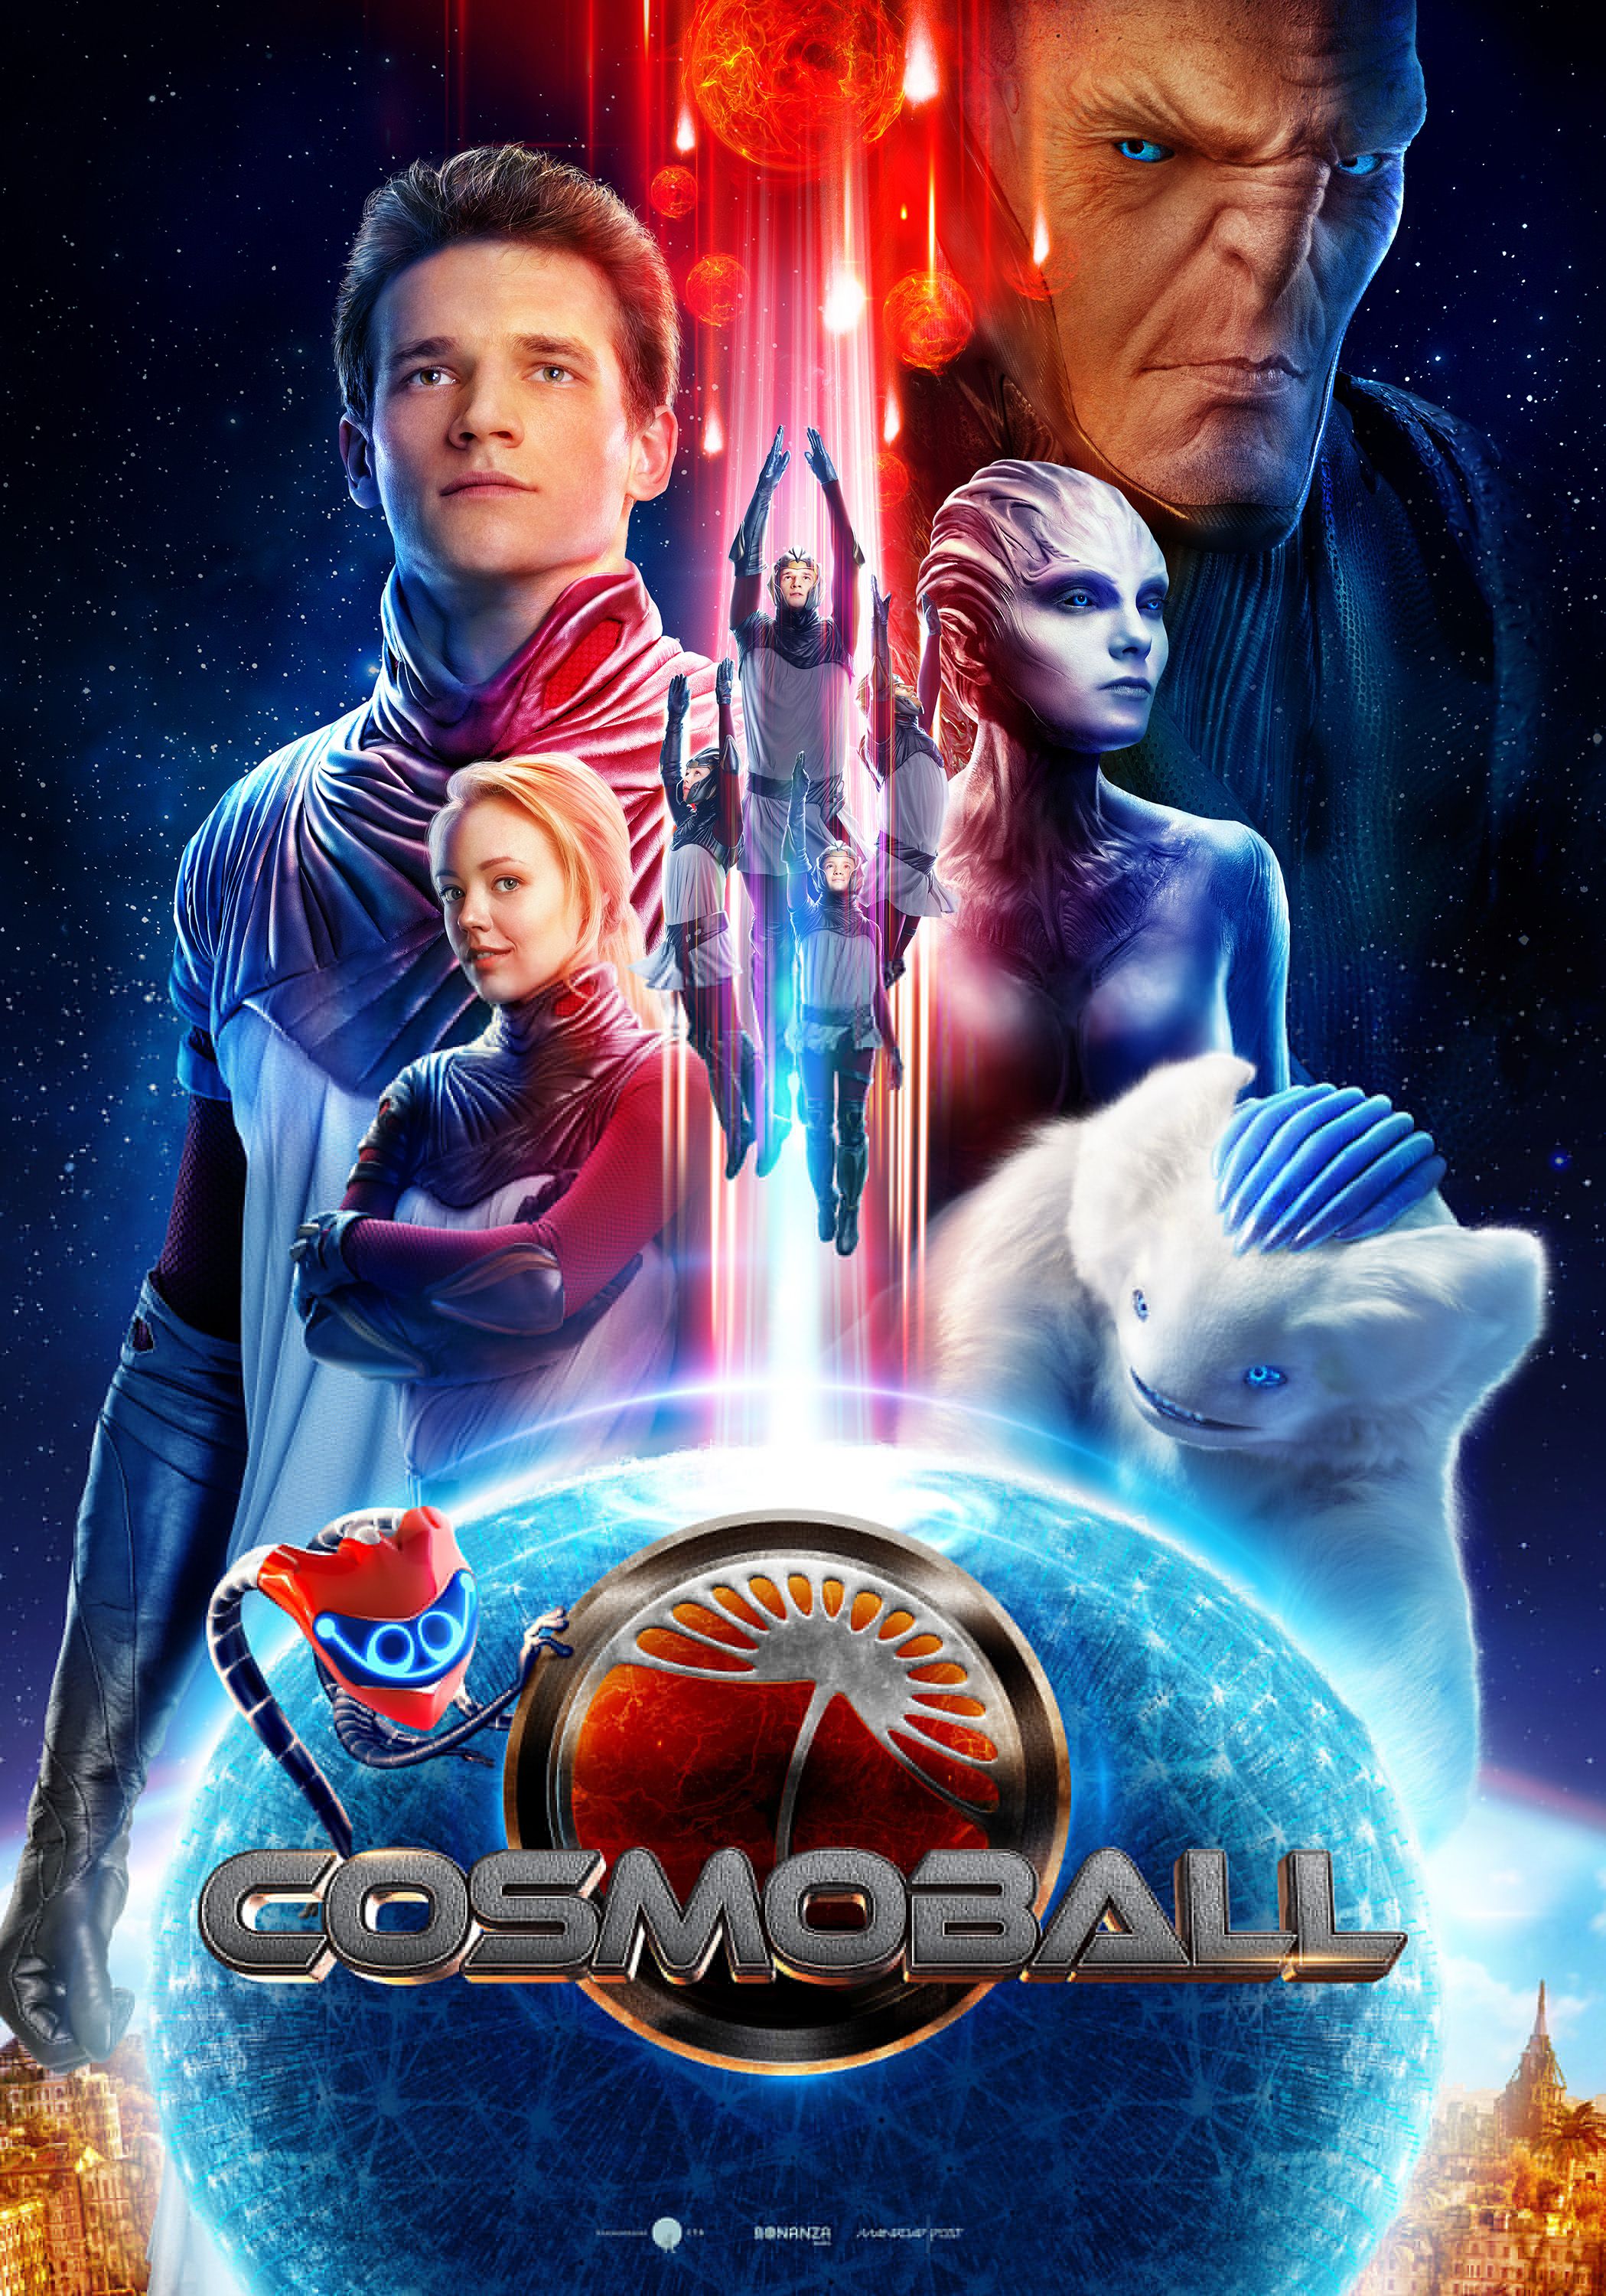 Cosmoball (2020) Hindi Dubbed Full Movie